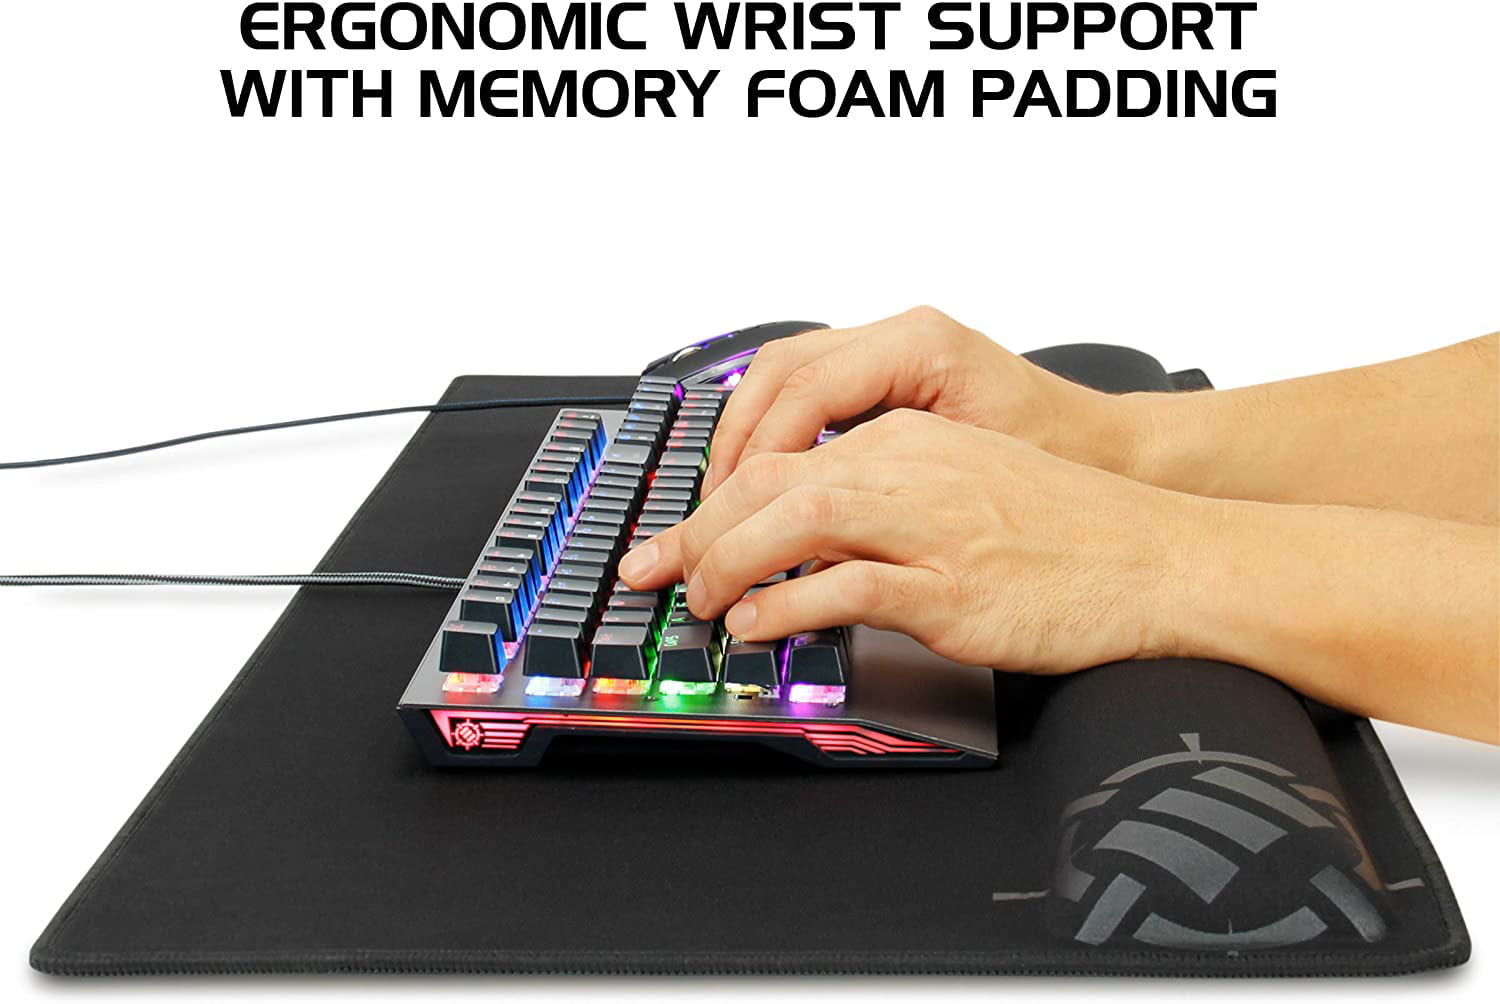 Gaming mouse pad with wrist support